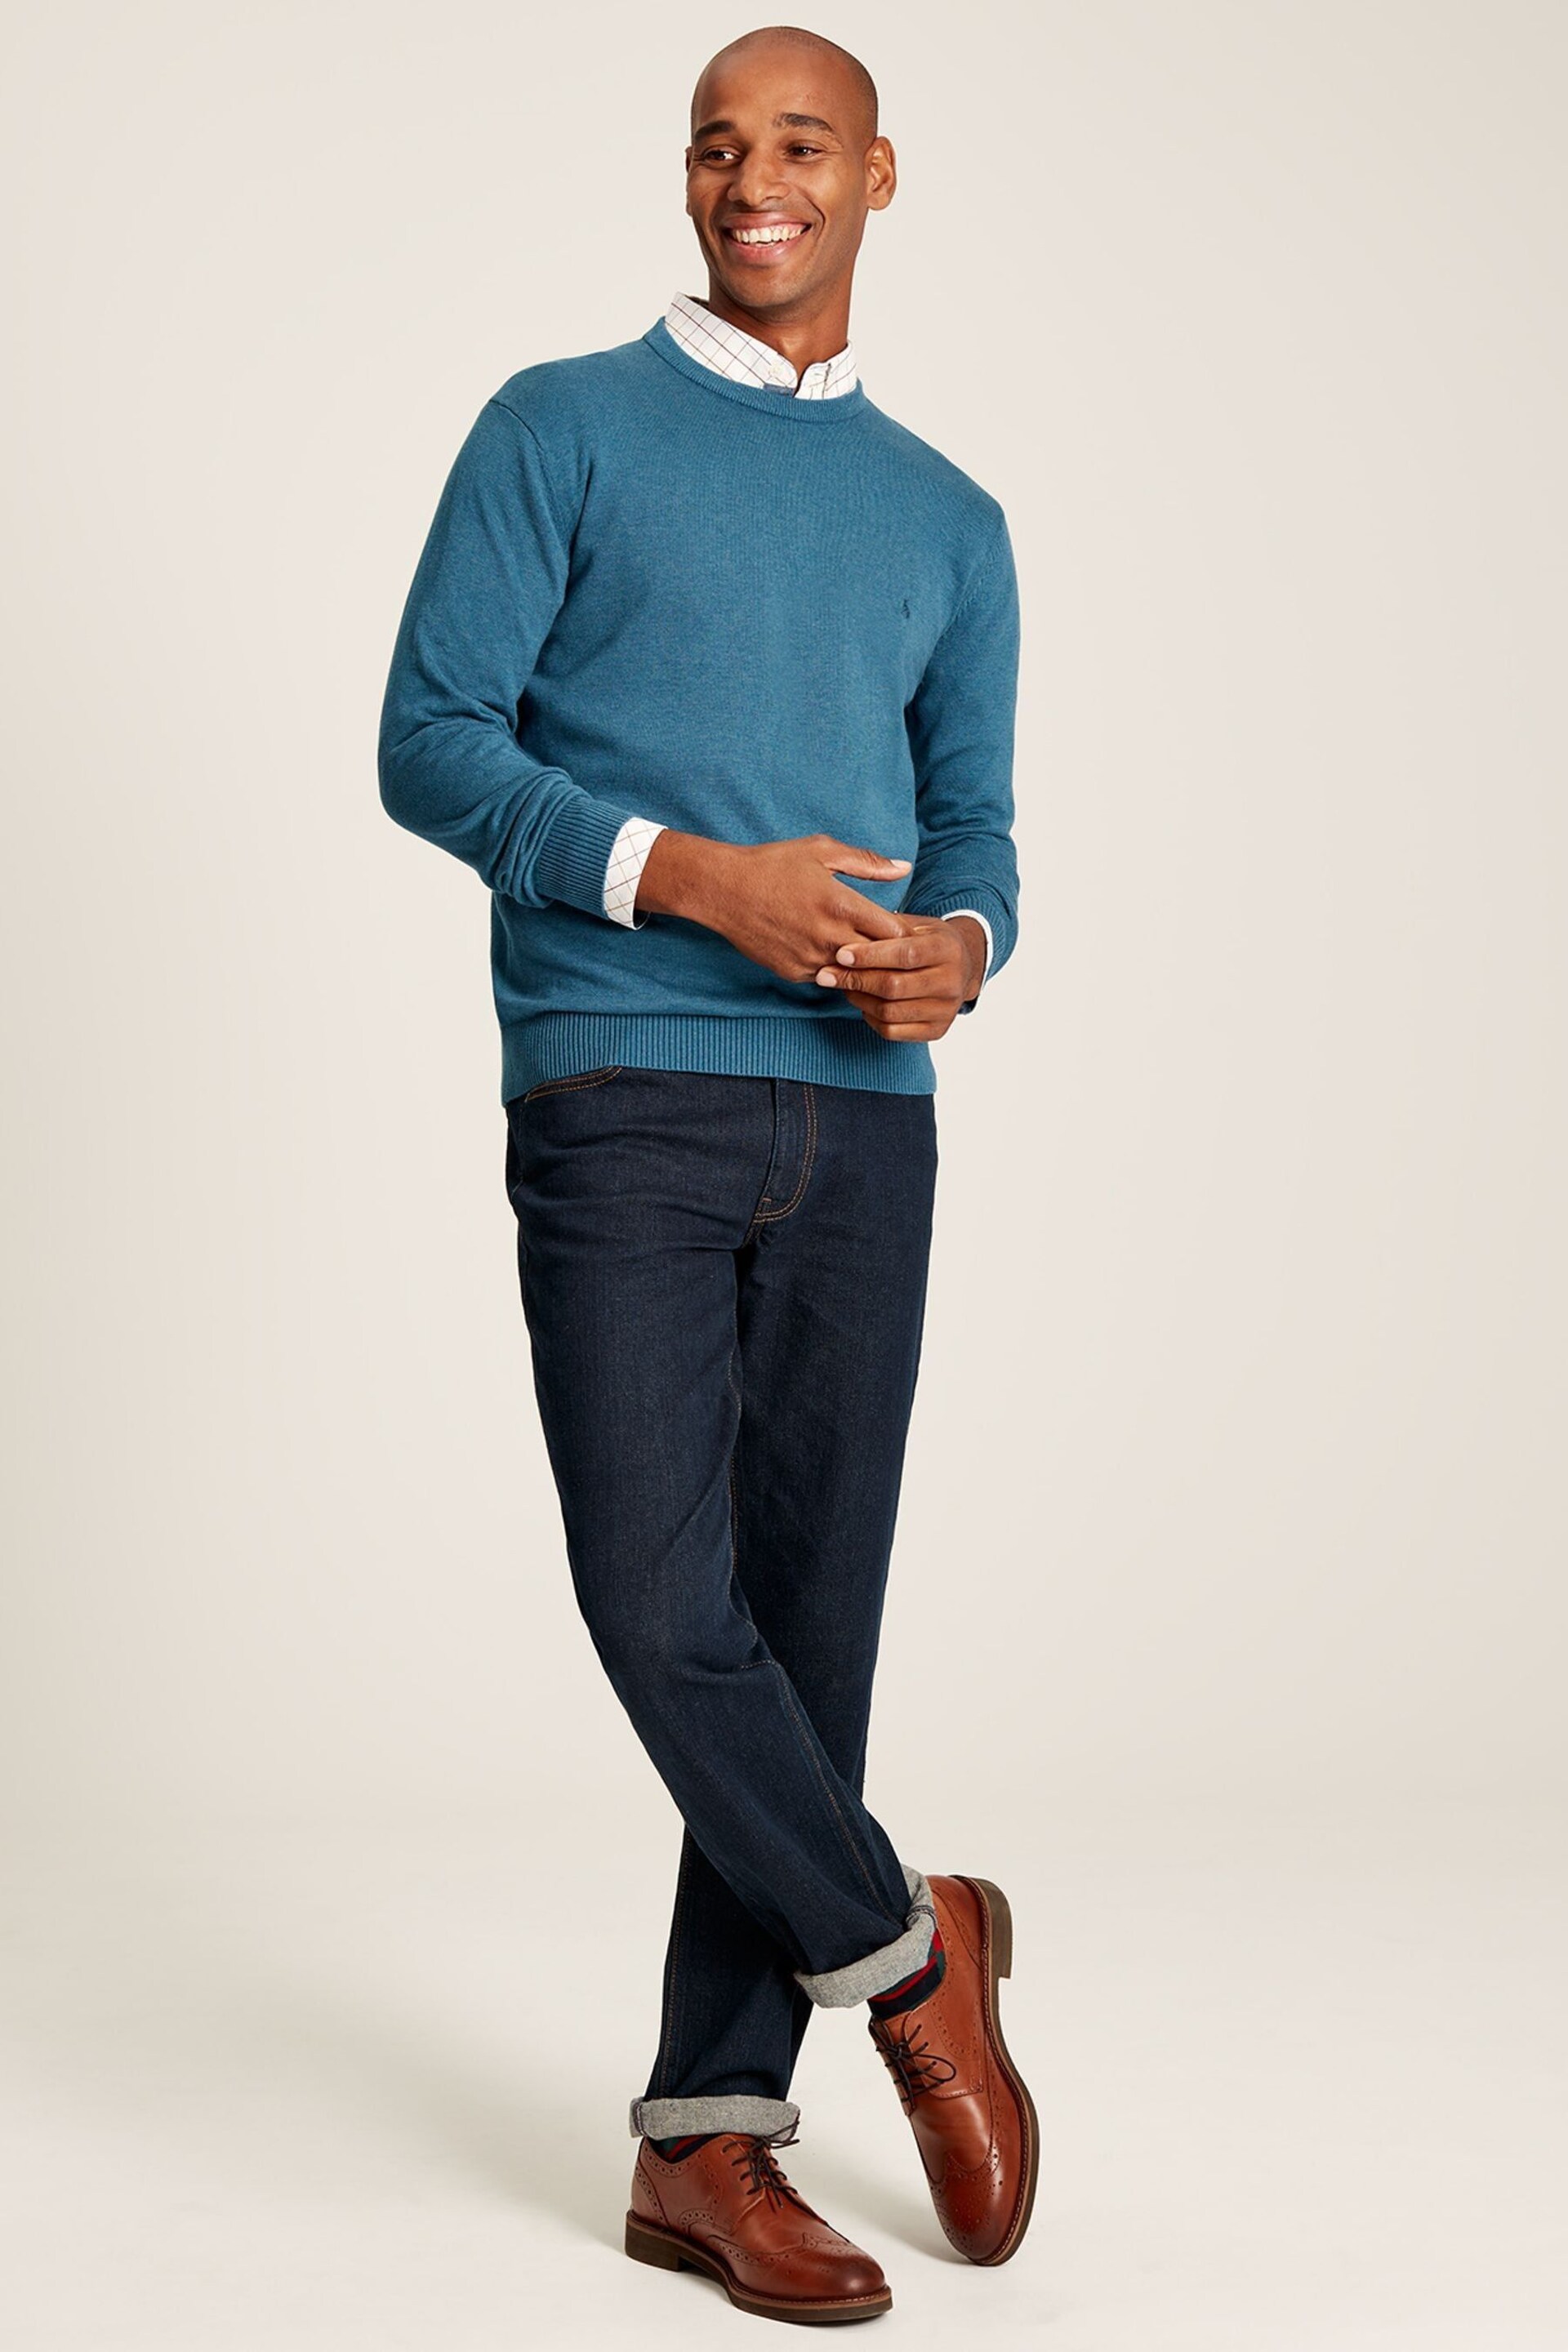 Joules Jarvis Blue Cotton Crew Neck Jumper - Image 5 of 6